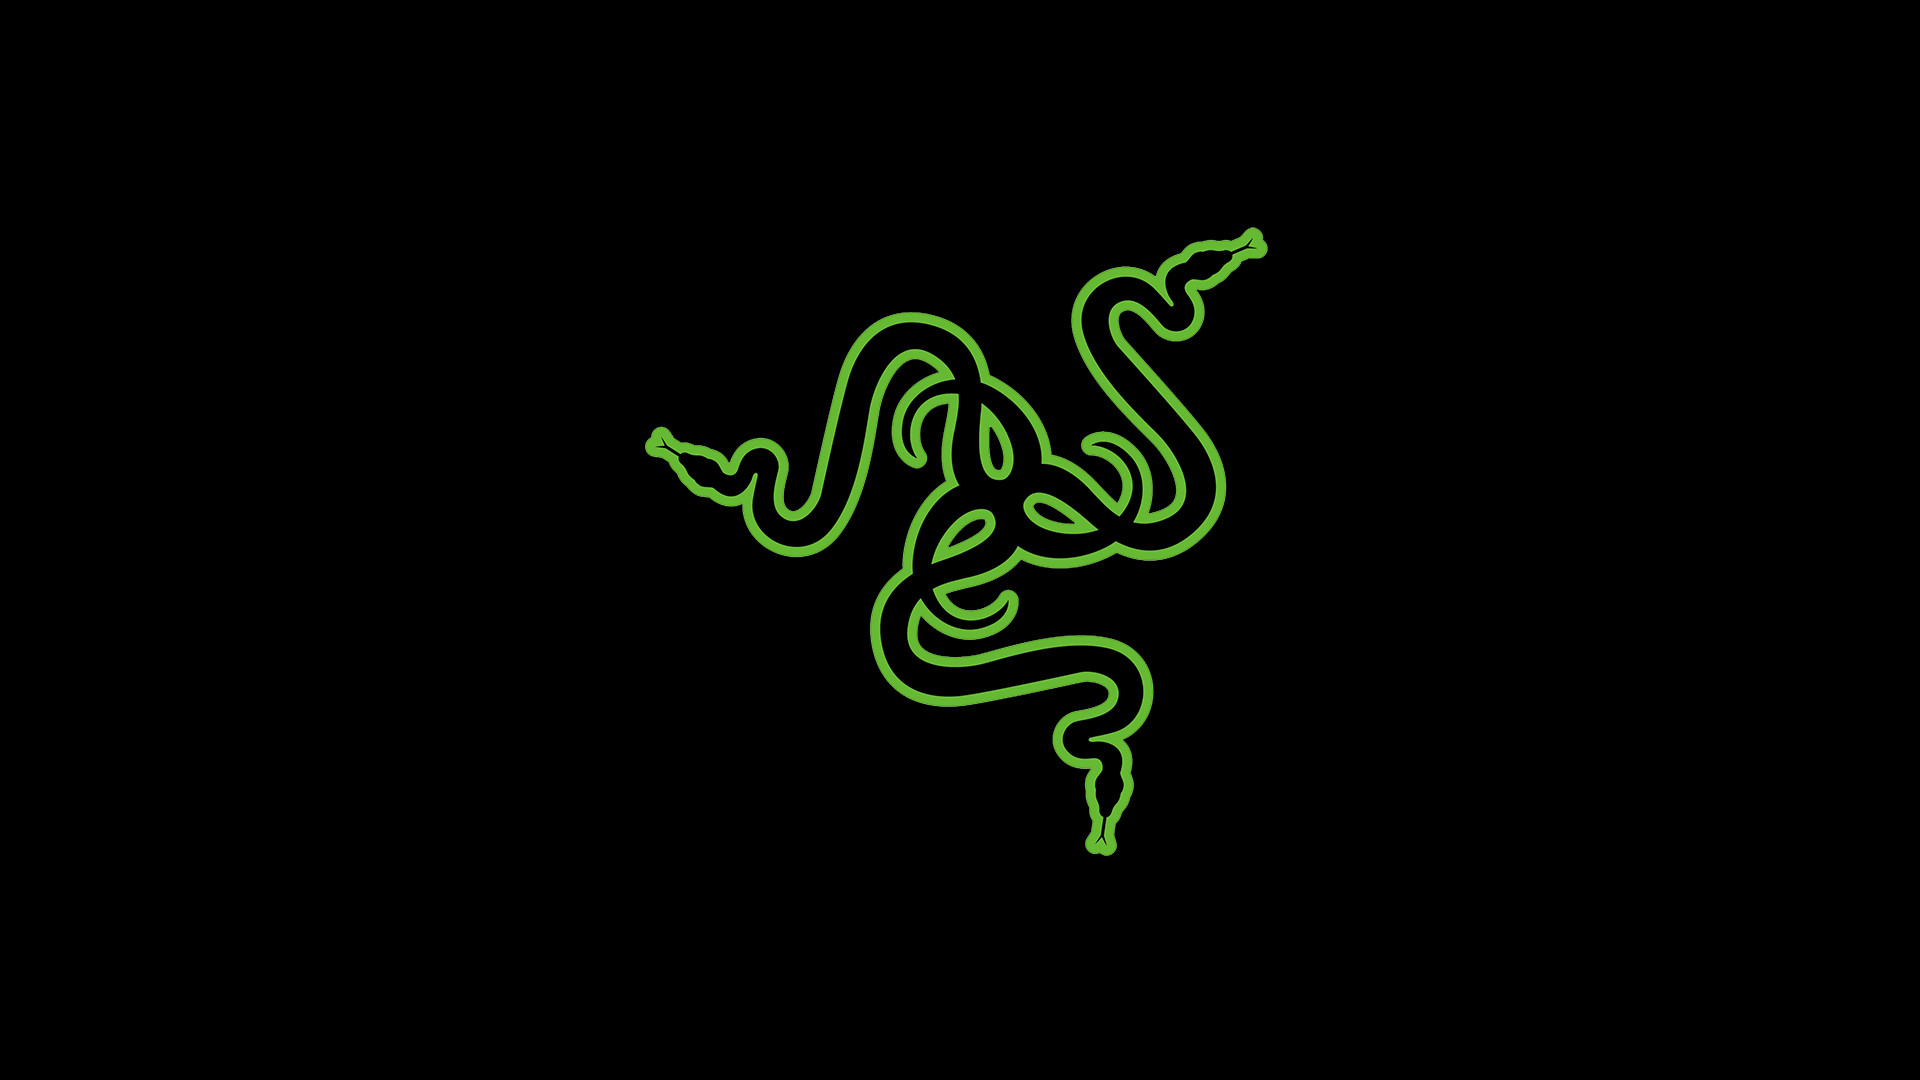 1920×1080 Made this minimalist wallpaper for Razer fans